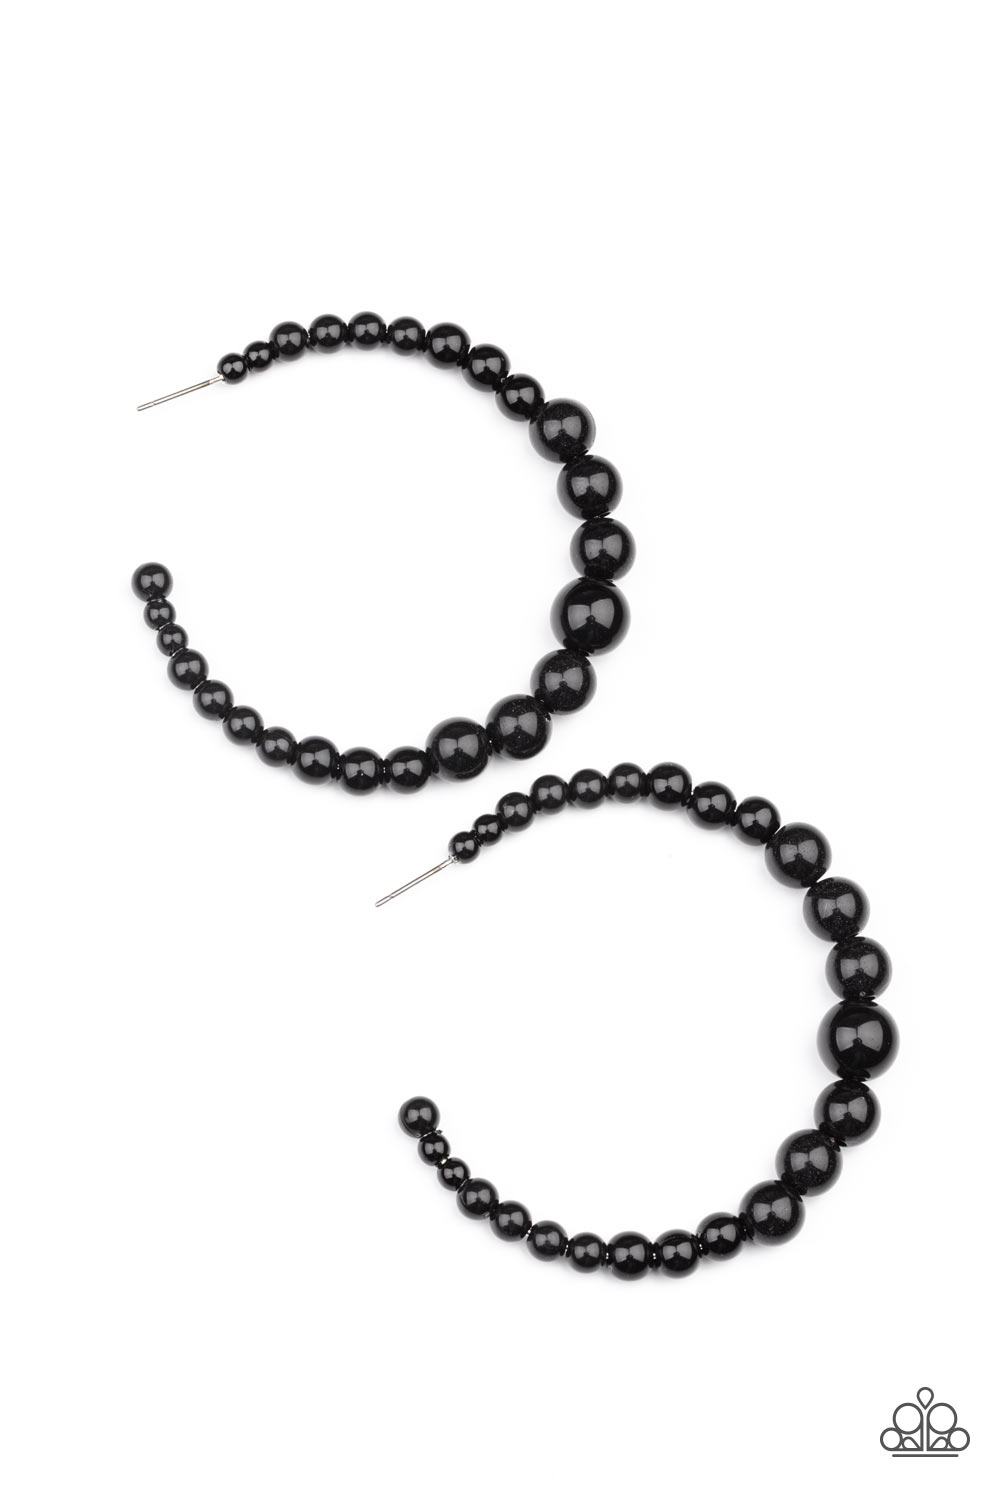 Glamour Graduate - Paparazzi - Gradually increasing in size at the center, a classic row of polished black beads are threaded along an oversized hoop for a posh finish.